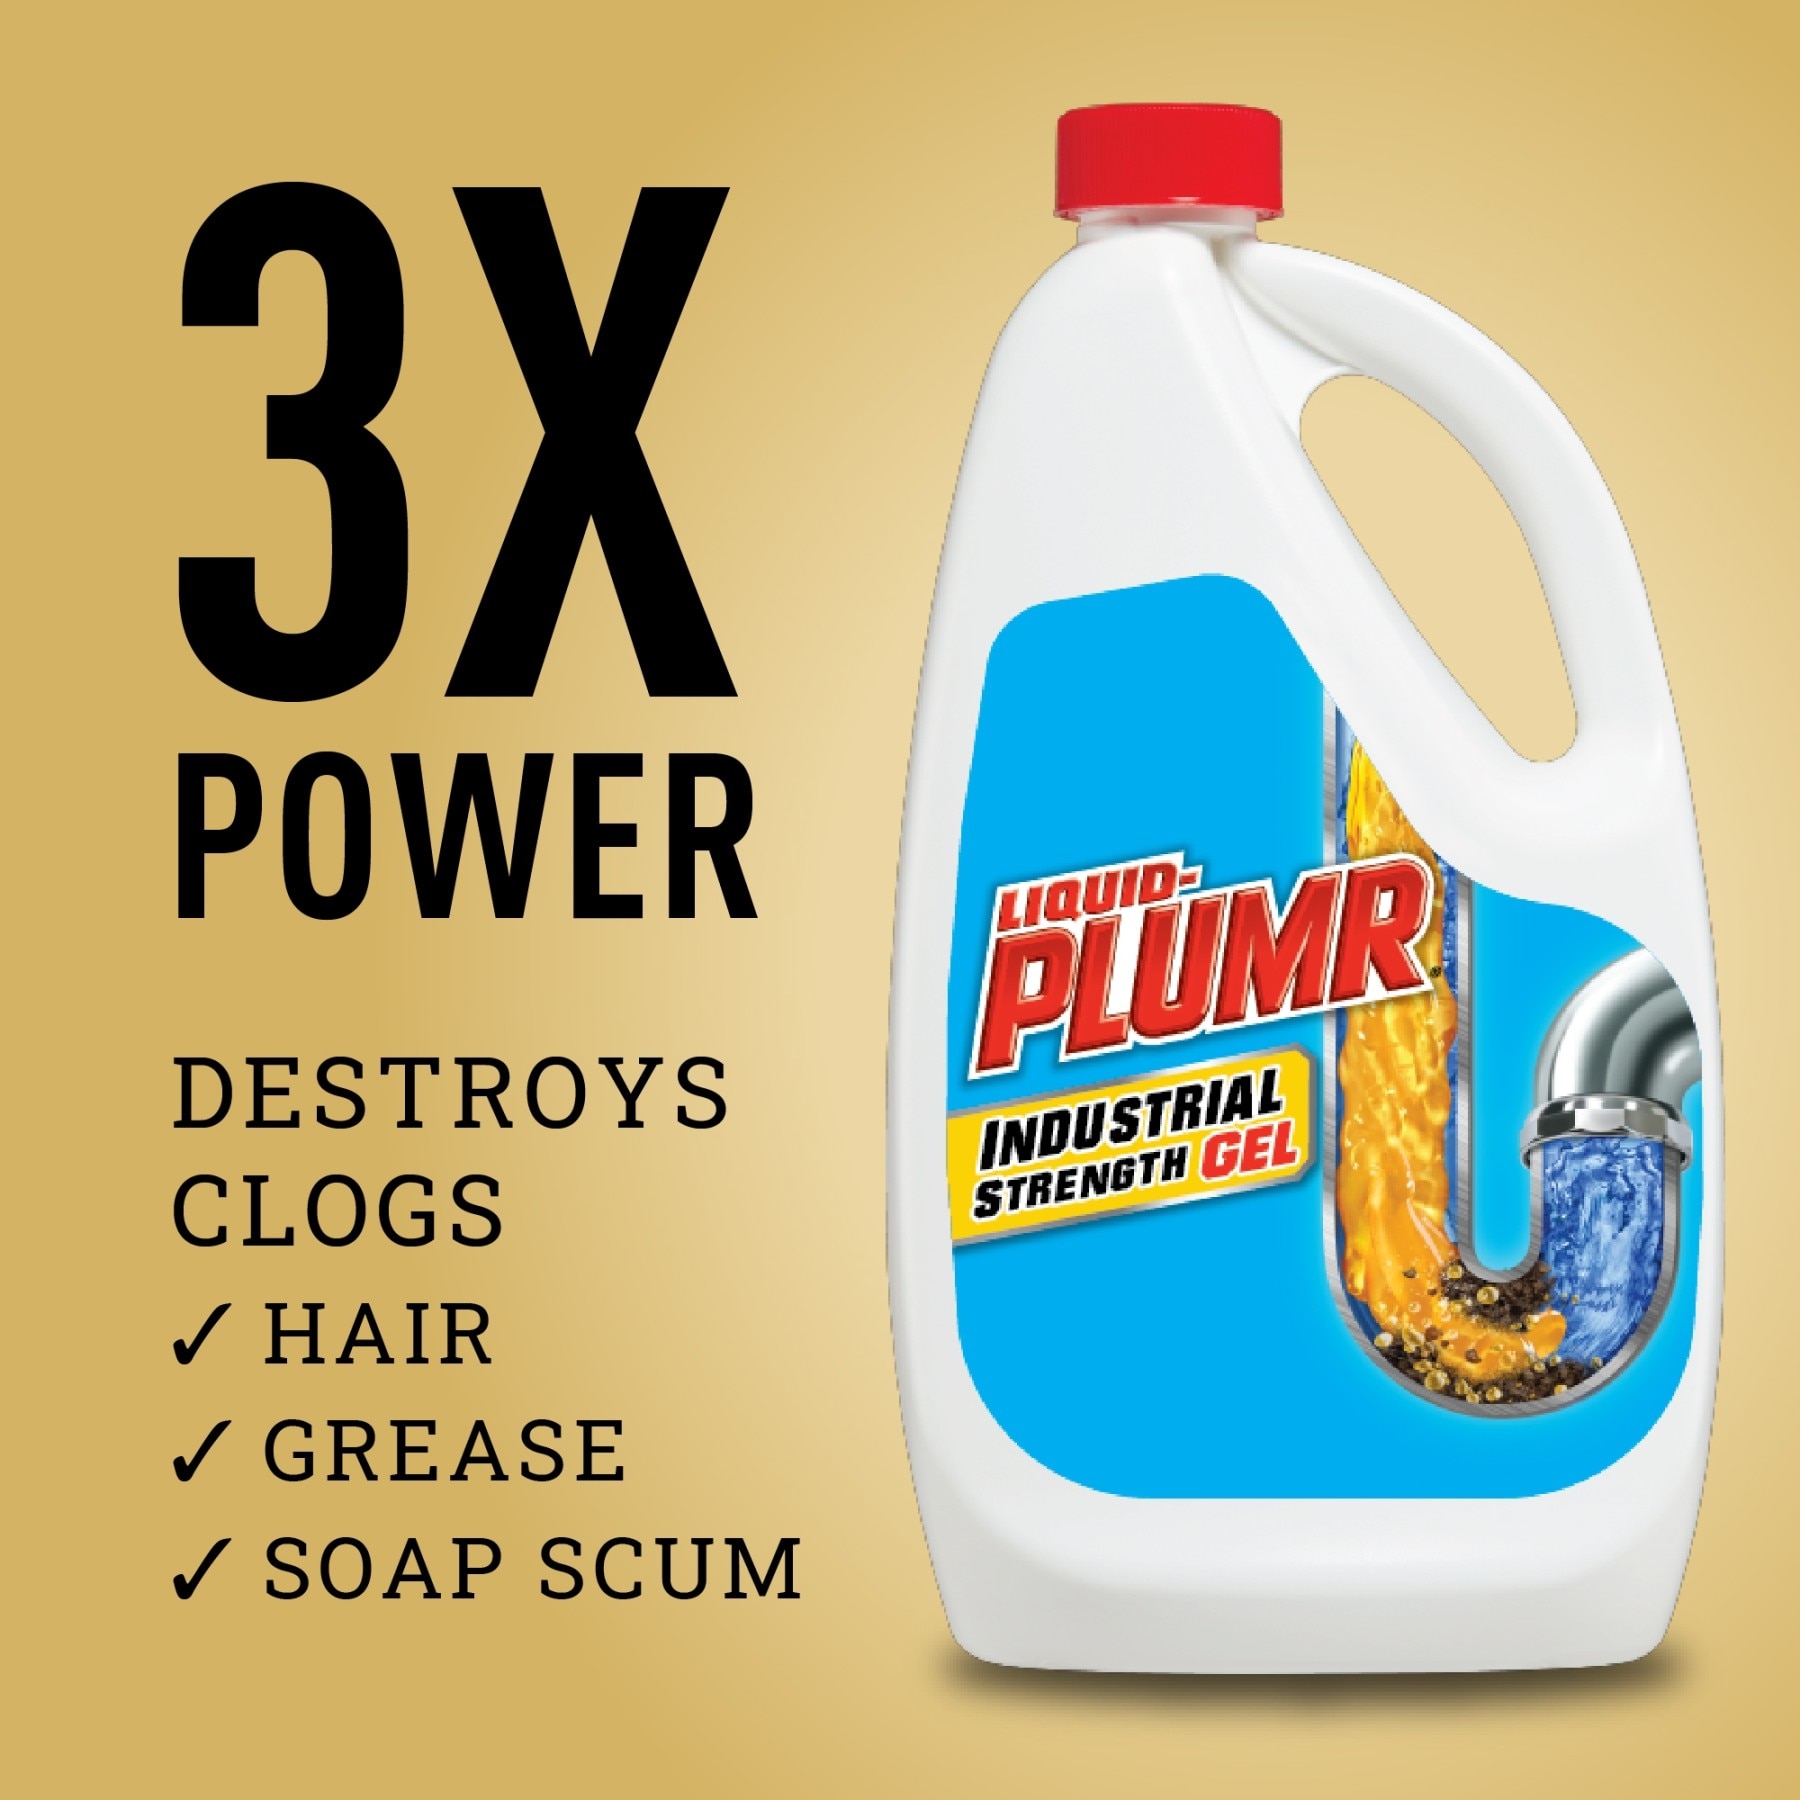 Instant Power Liquid Drain Cleaner for Bathrooms - Clears Main